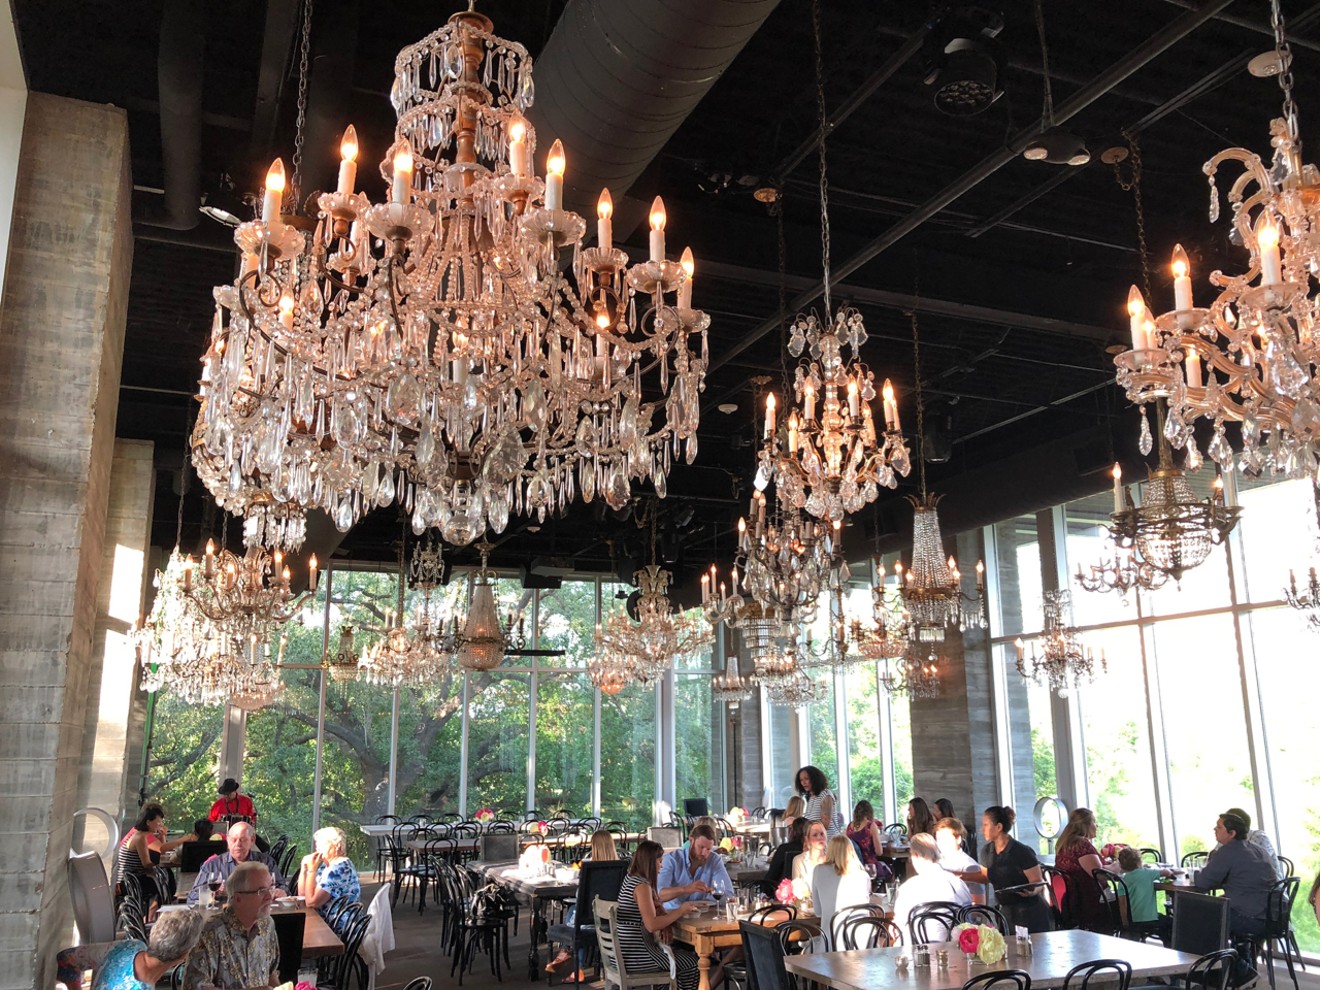 Want to do date night underneath a canopy of crystal chandeliers? Now's your chance.